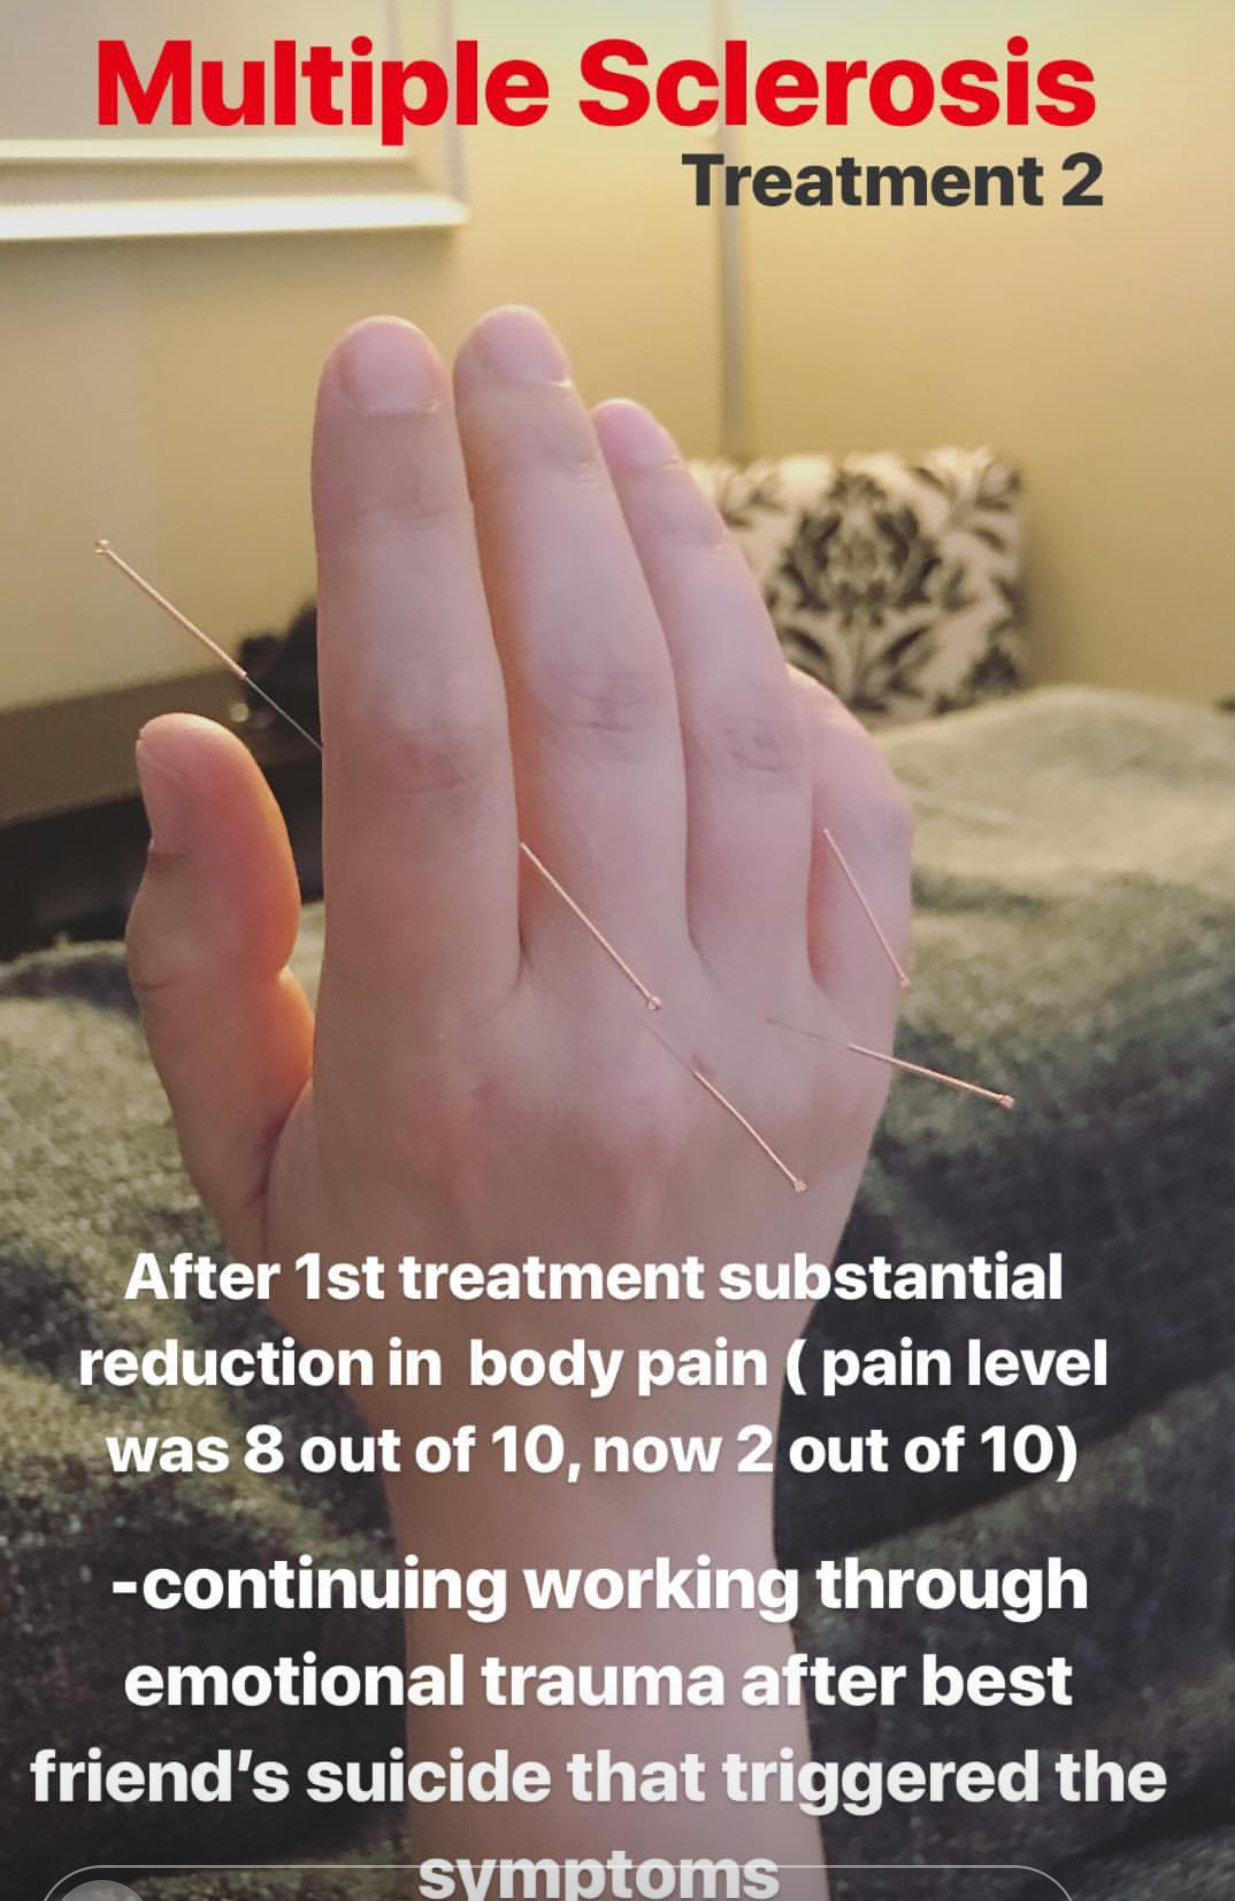  continuation of acupuncture treatment for multiple sclerosis case triggered by personal emotionally stressing events.  